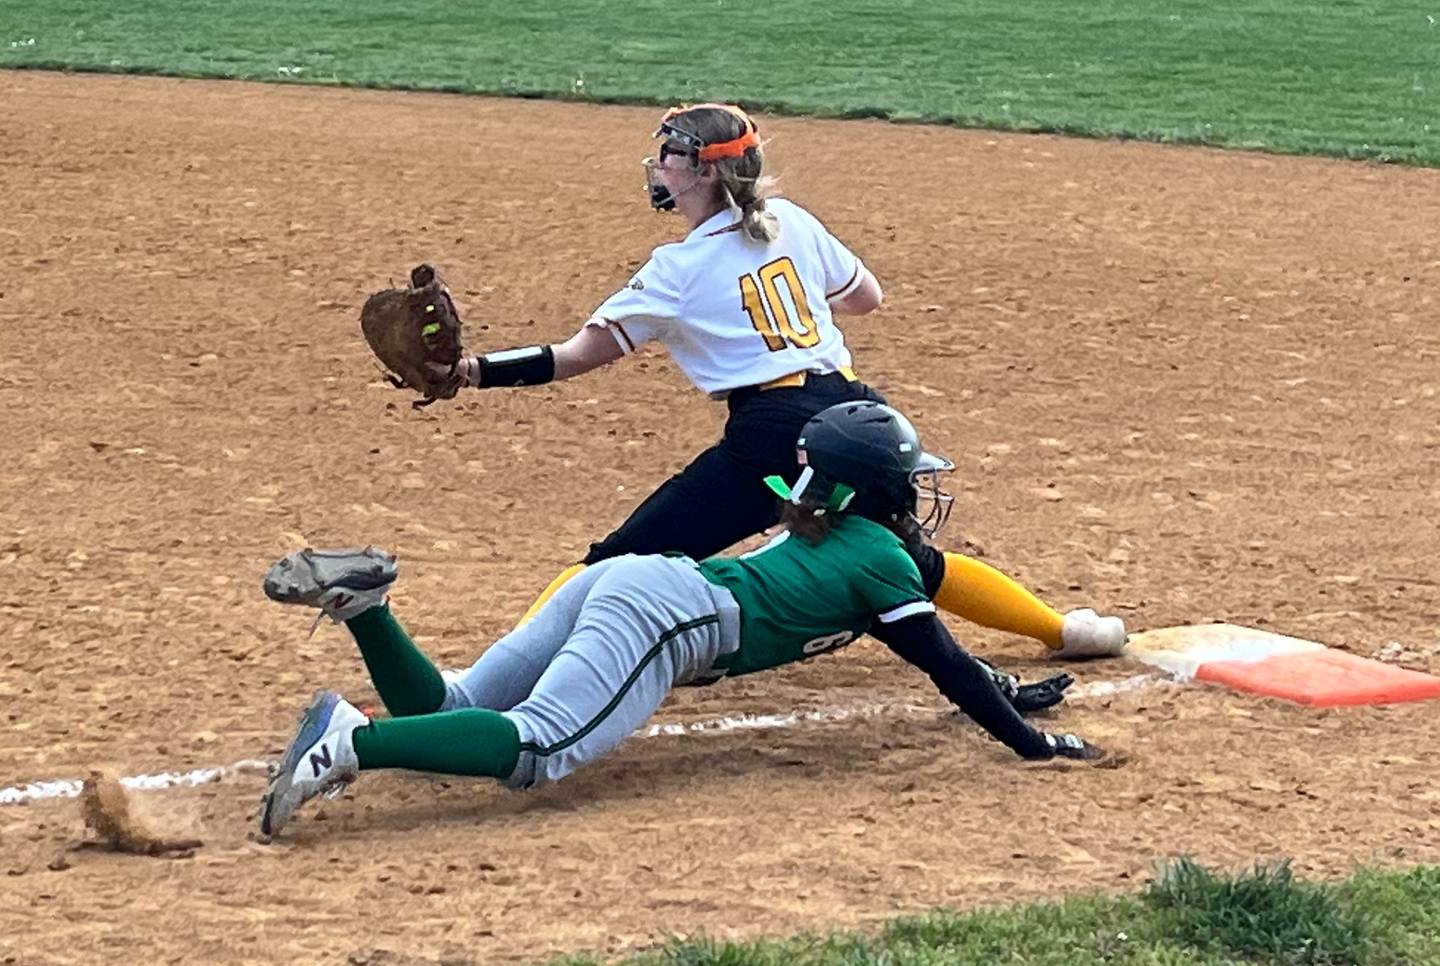 Arundel's Bria Sewell dives for first base as Northeast first basemen Mackenzie Weiland has the ball for the out during the third inning of Monday's Anne Arundel County softball contest. The Eagles improved to 11-1 with a 4-1 victory in Pasadena.